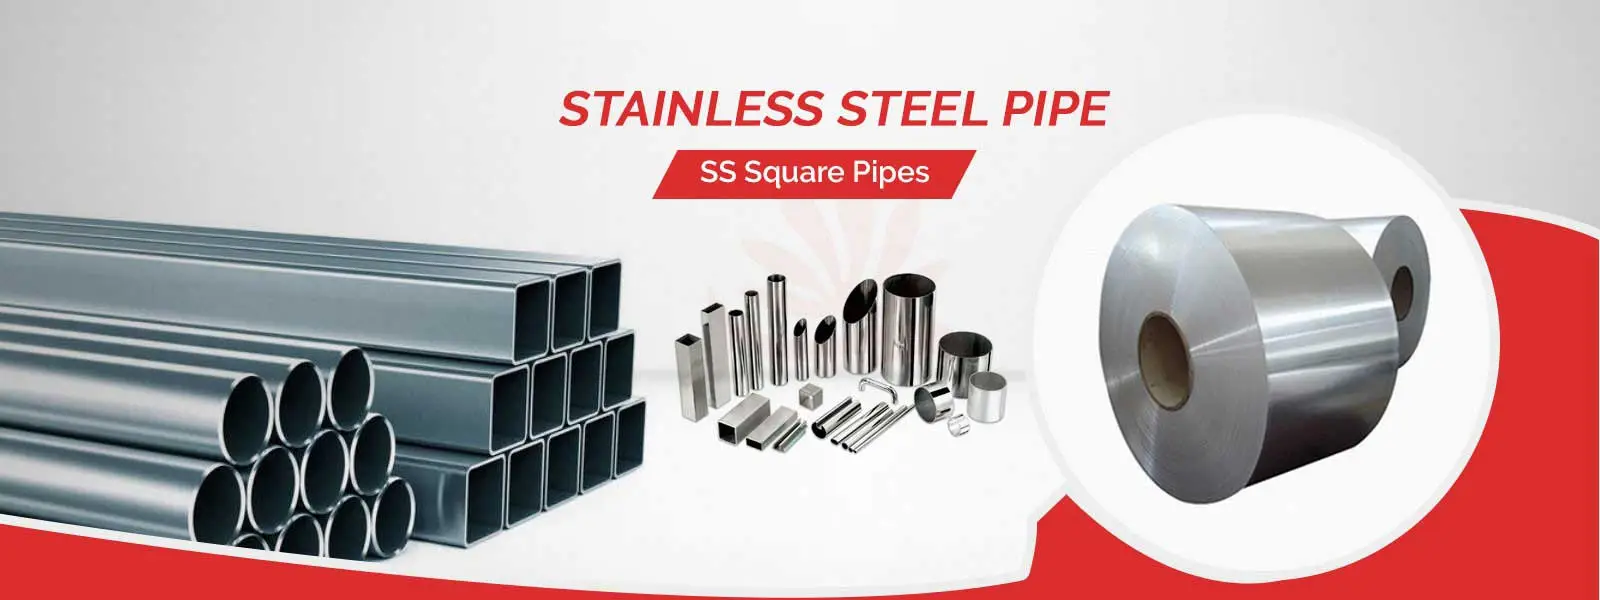 Stainless Steel Pipe Manufacturers in Ranchi